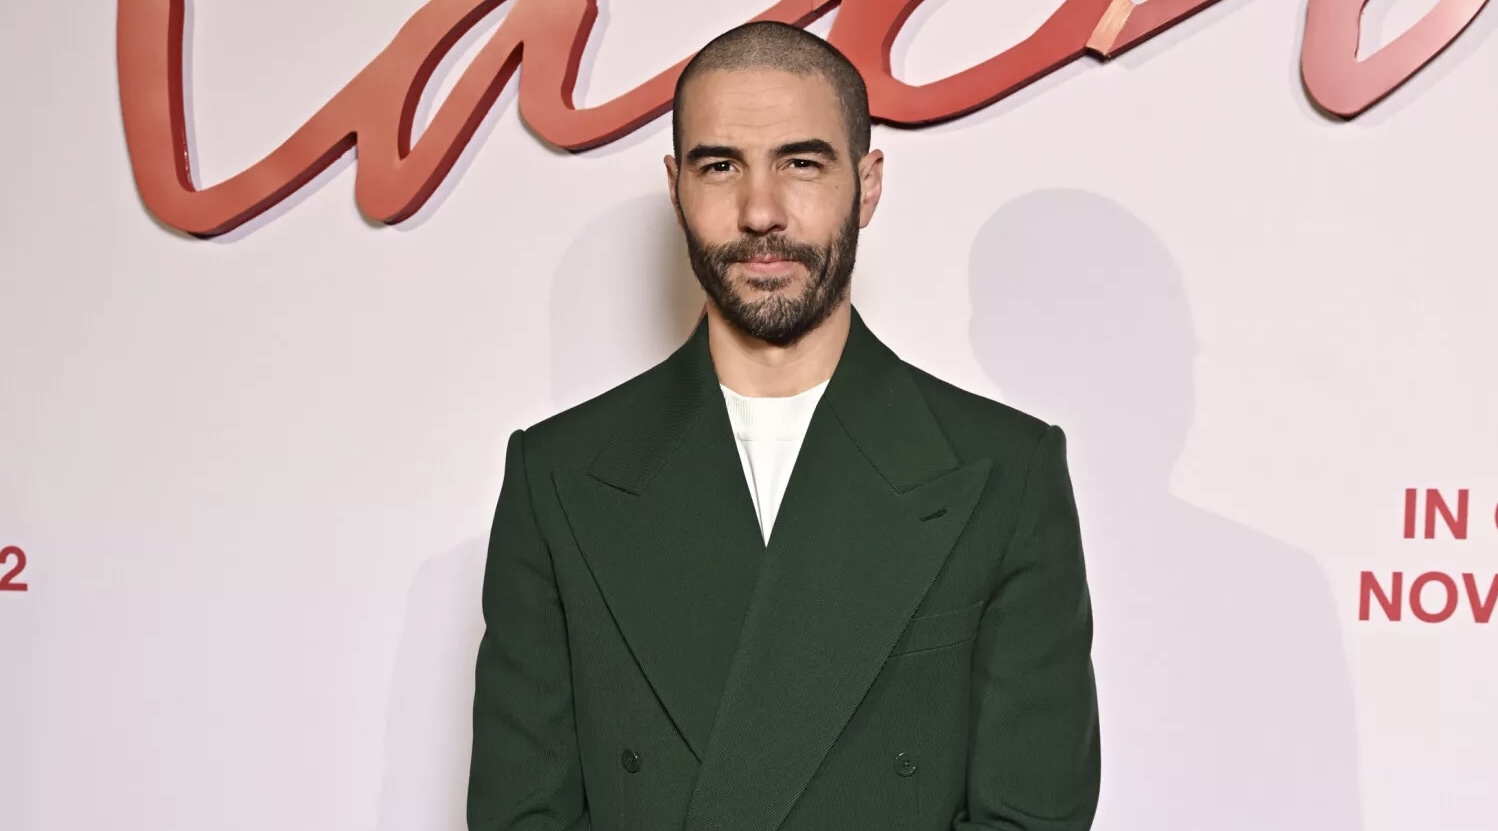 Tahar Rahim stands with effortless grace in a custom green wool suit by Pharrell for Louis Vuitton, paired with a Tambour watch and burgundy loafers, exuding a blend of classic elegance and contemporary fashion sensibility.